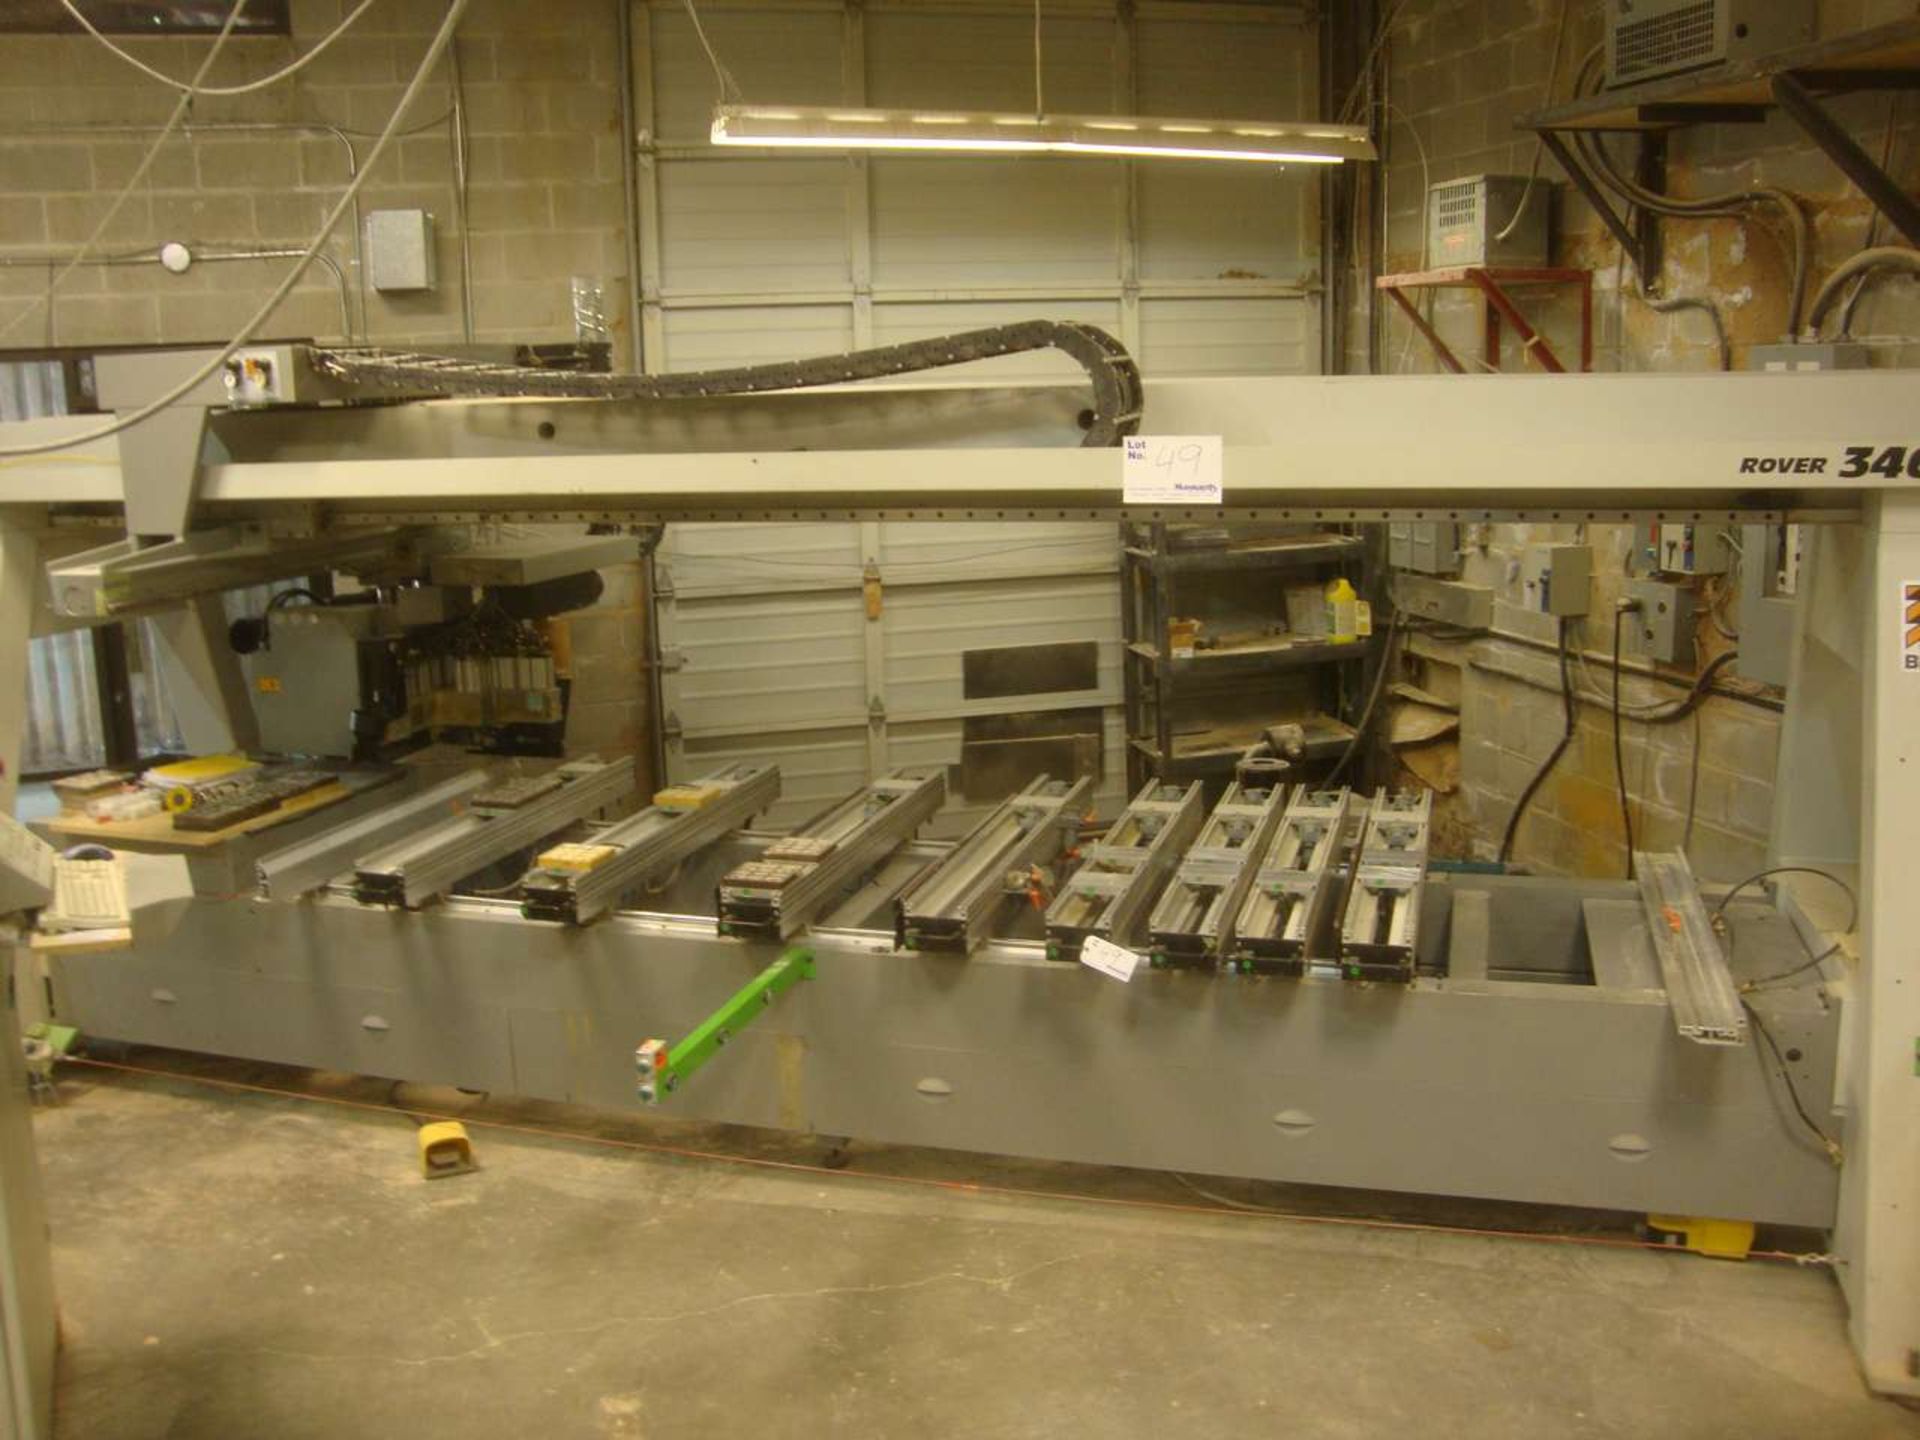 1998 Biesse Rover 346 POINT TO POINT ROUTER - Image 3 of 8